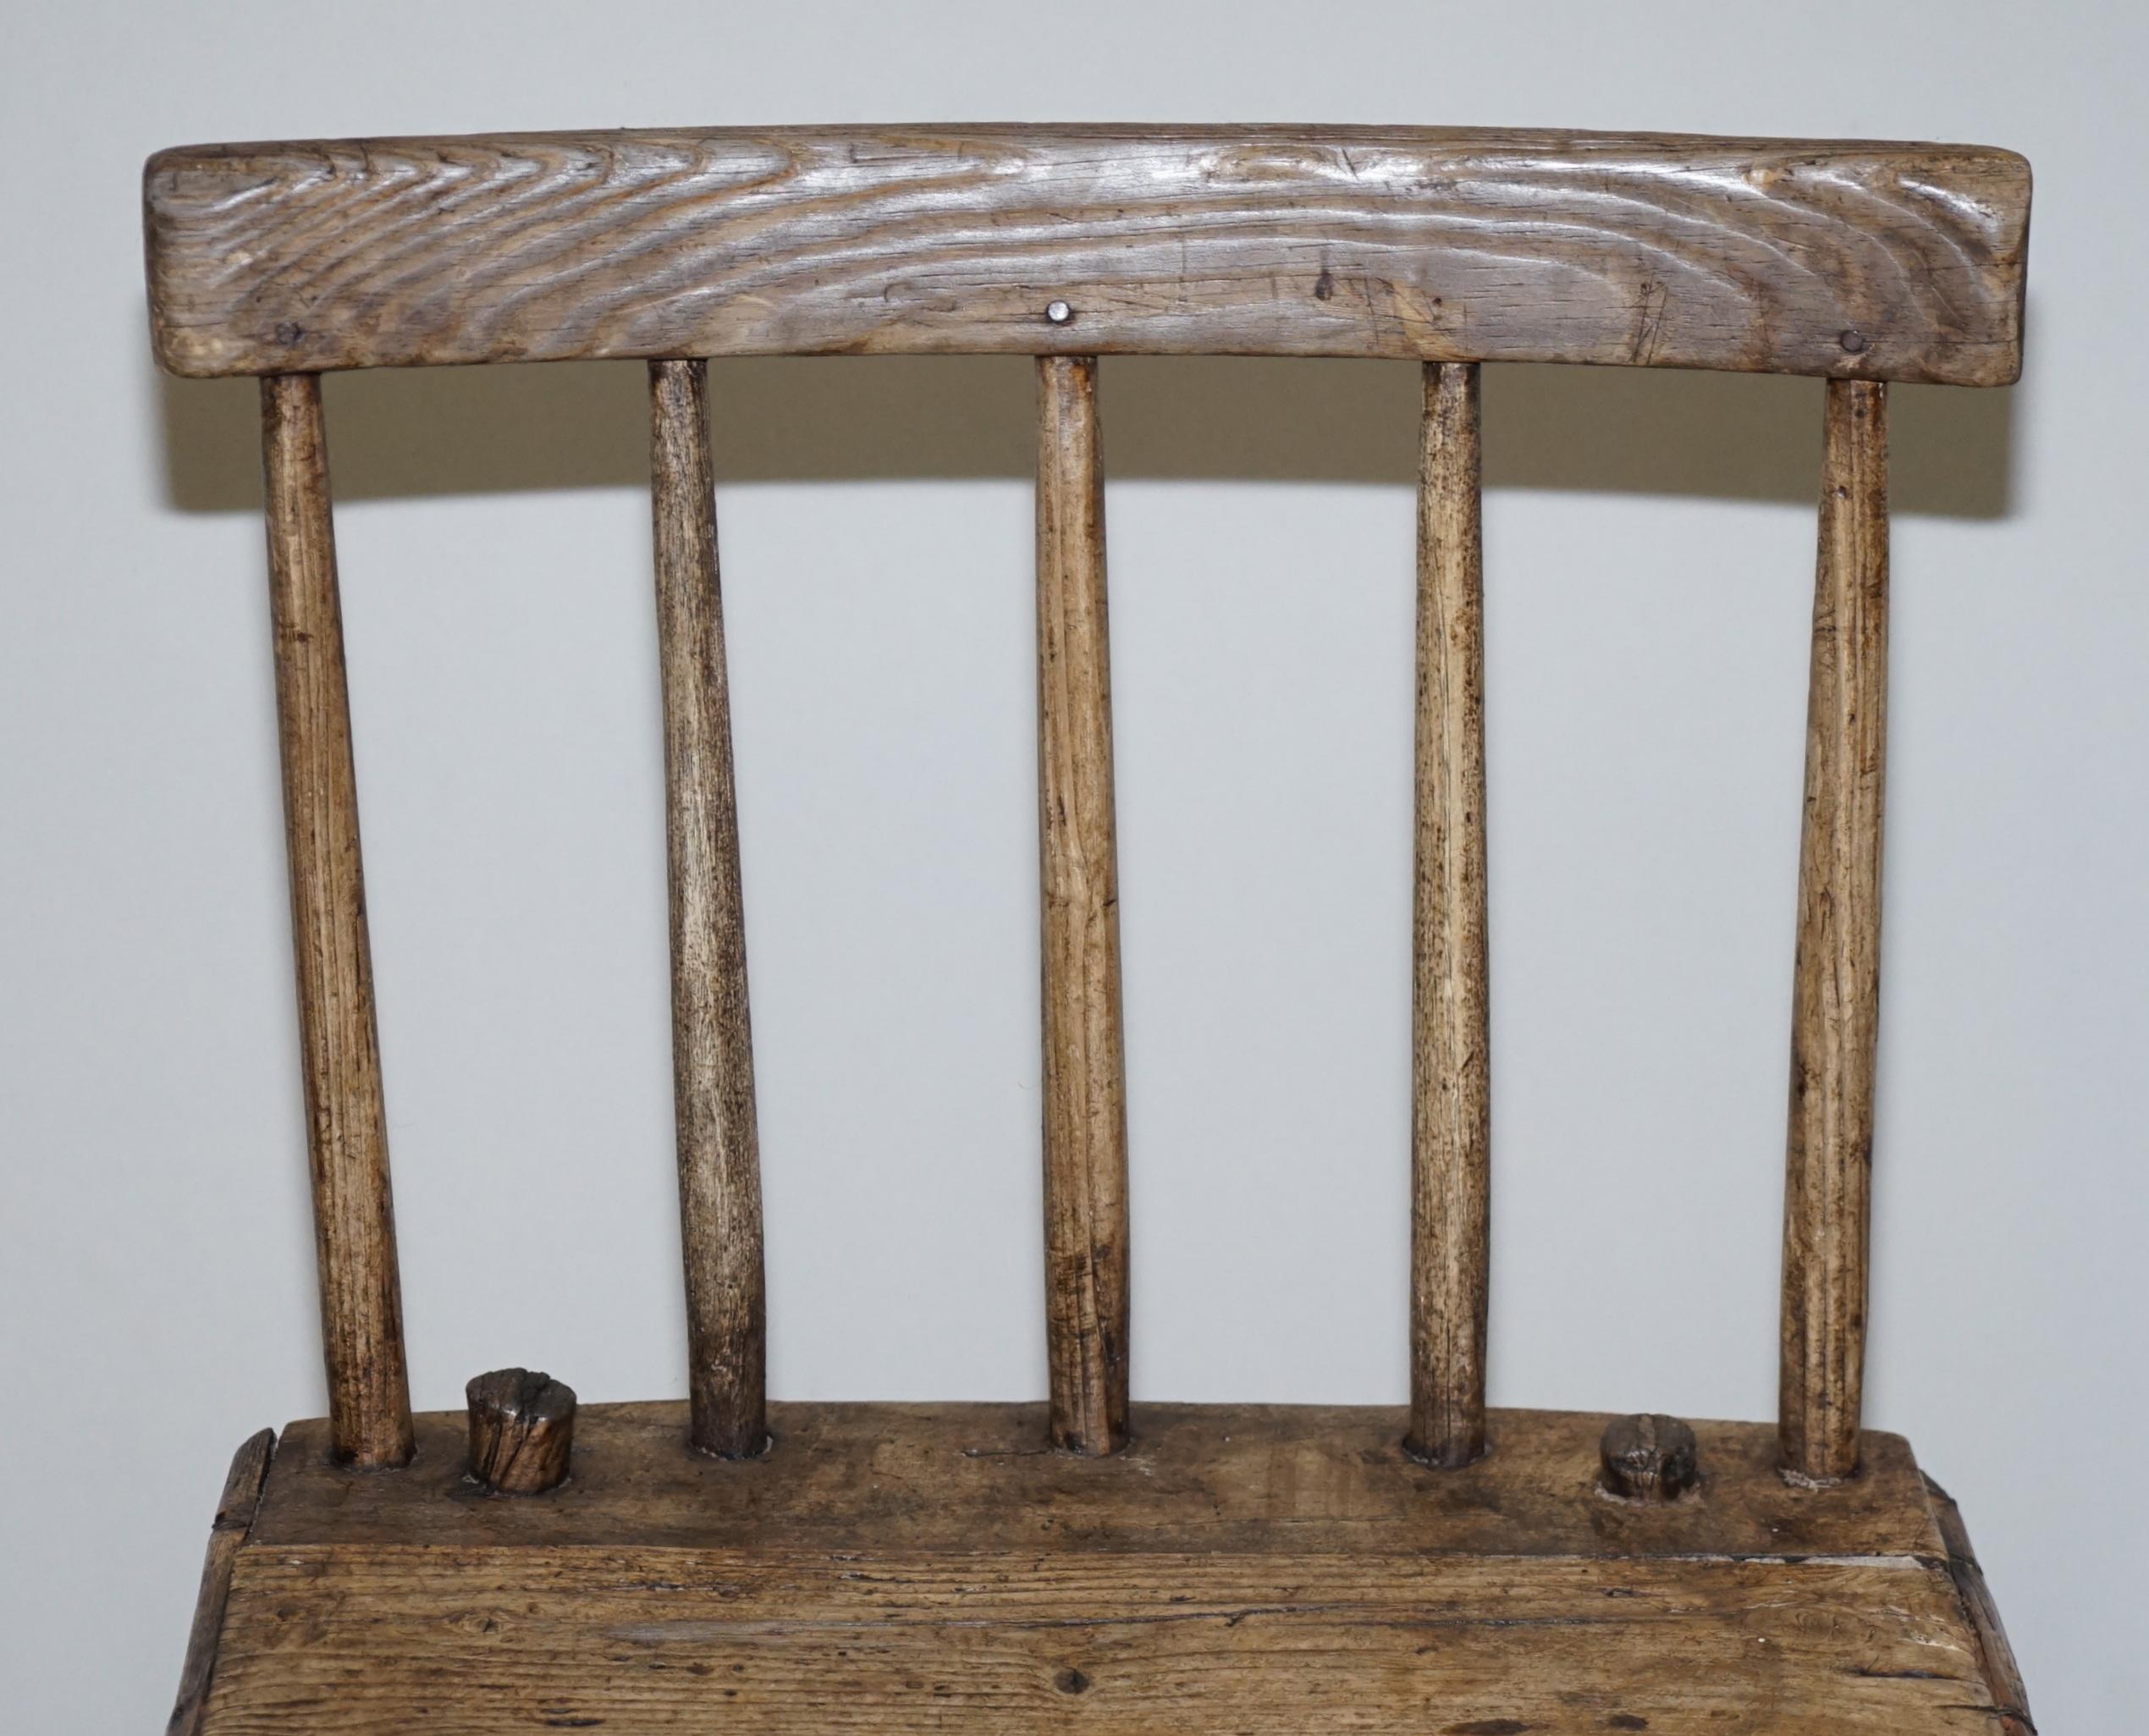 Hand-Crafted Rare & Primative circa 1820 Irish Famine Chair Original Timber 200+ Years Old For Sale